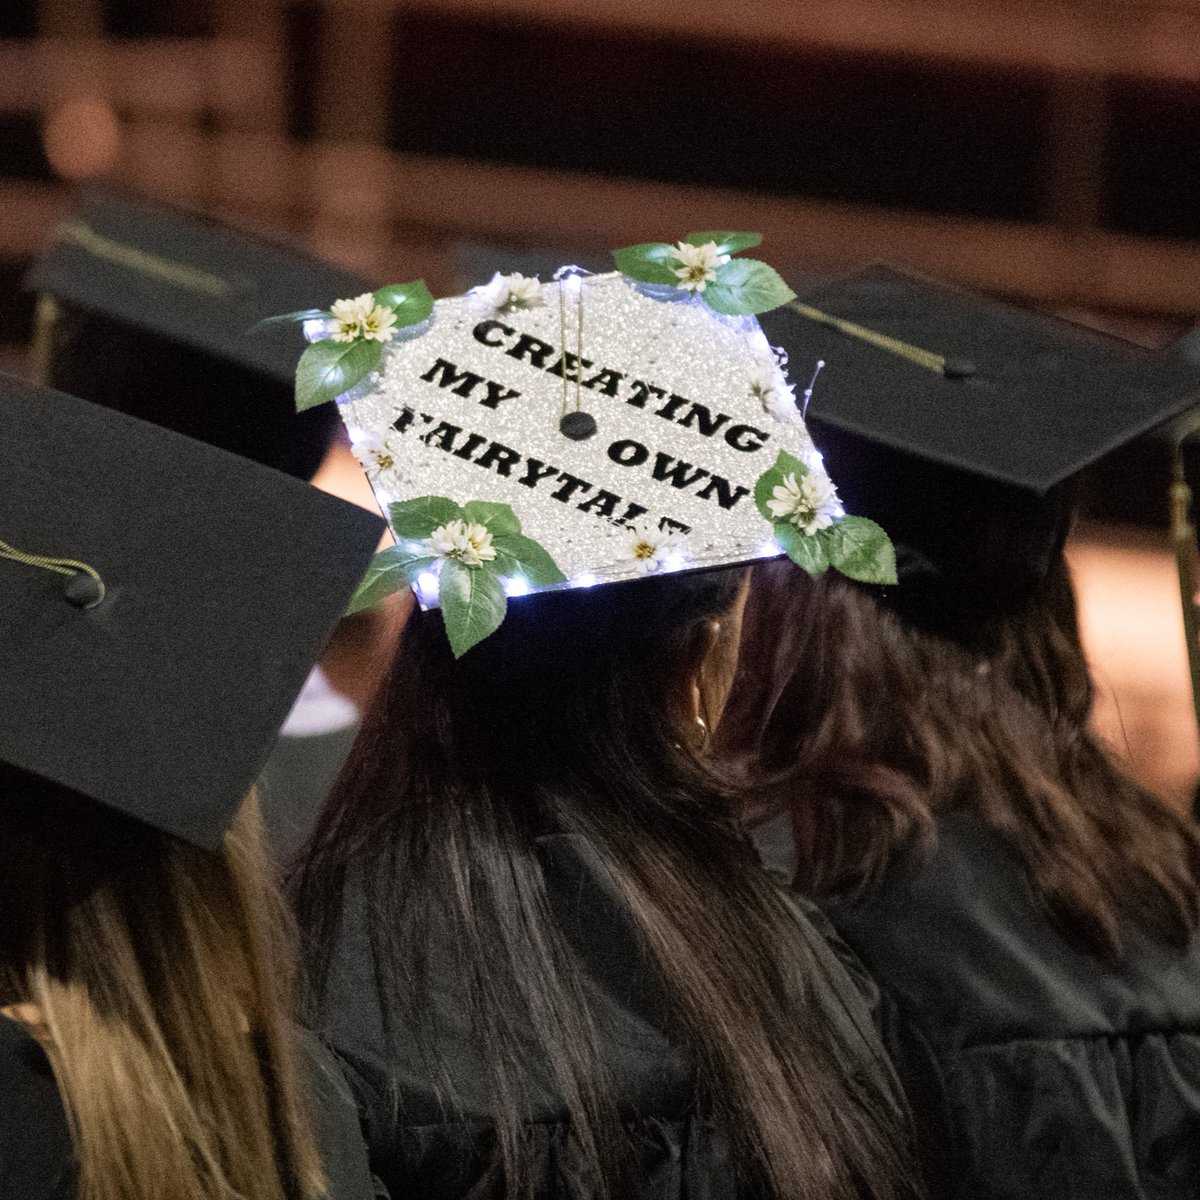 Cap-tivating 🎓 Creations April 17, 5 - 7 PM, ICCU Alumni Center. 🧡 Come and celebrate your commencement with us! Supplies are provided. RSVP at alumni.isu.edu